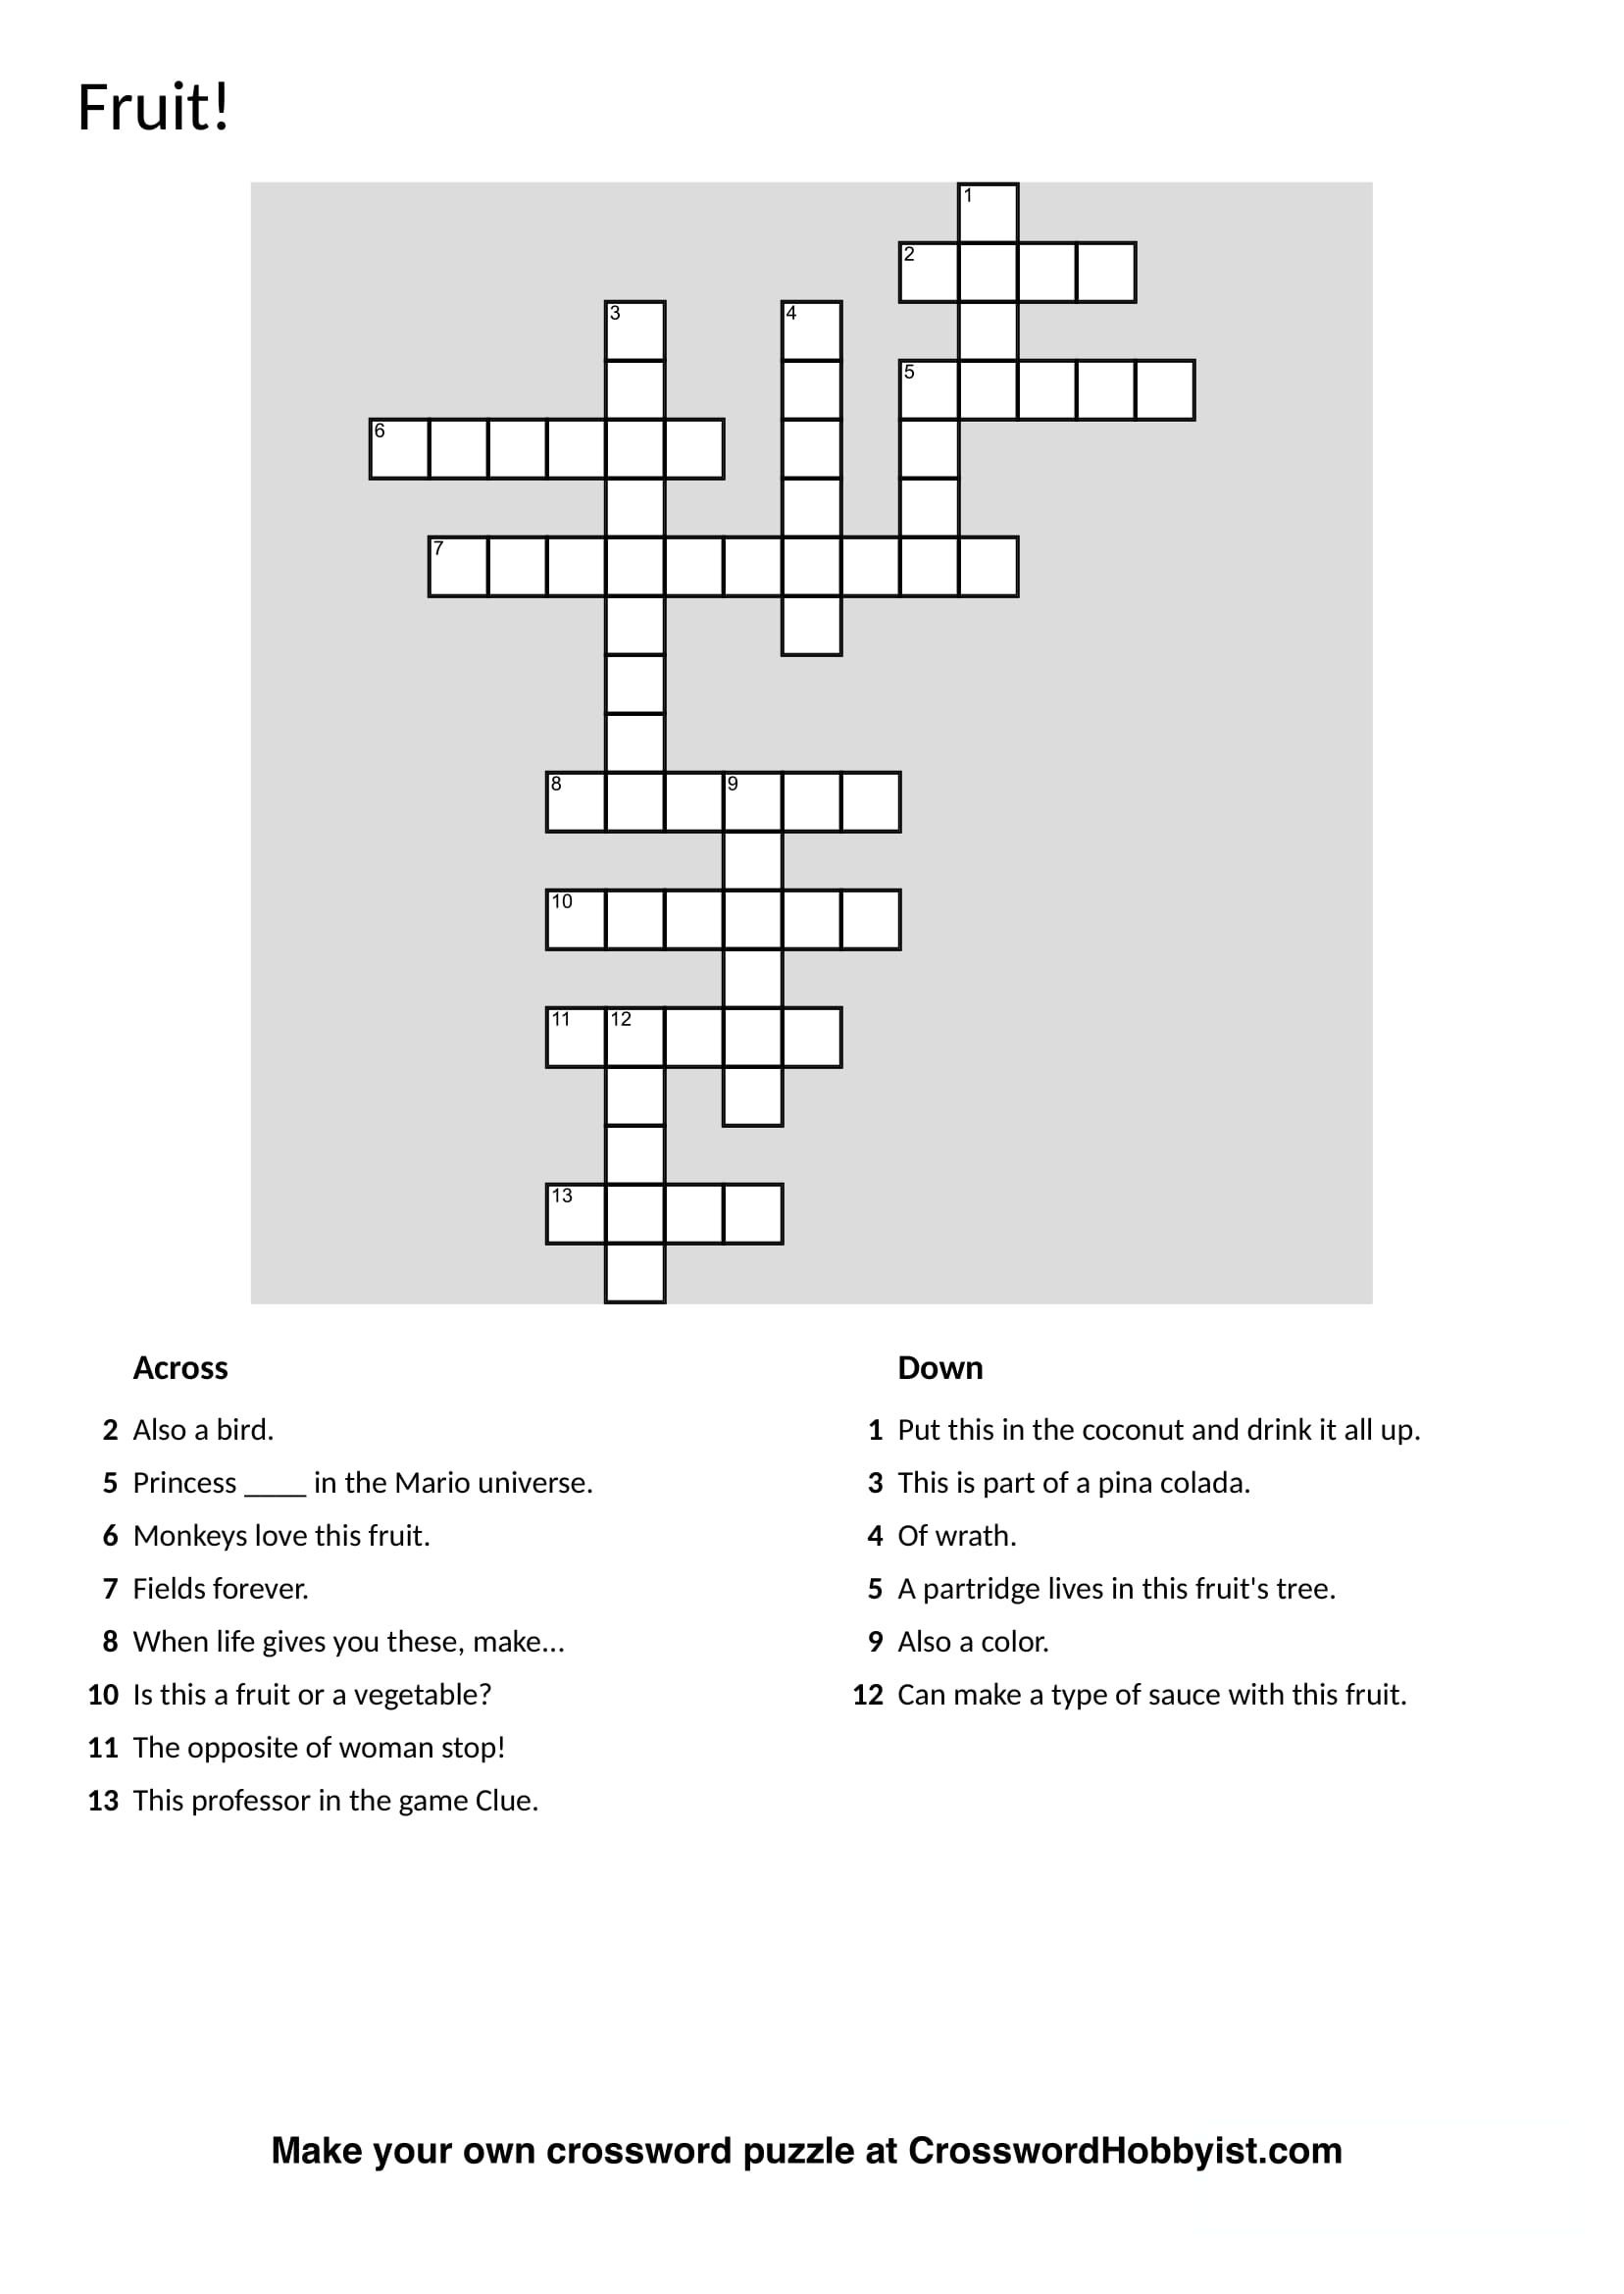 Make Your Own Fun Crossword Puzzles With Crosswordhobbyist - Free Crossword Puzzle Maker Printable